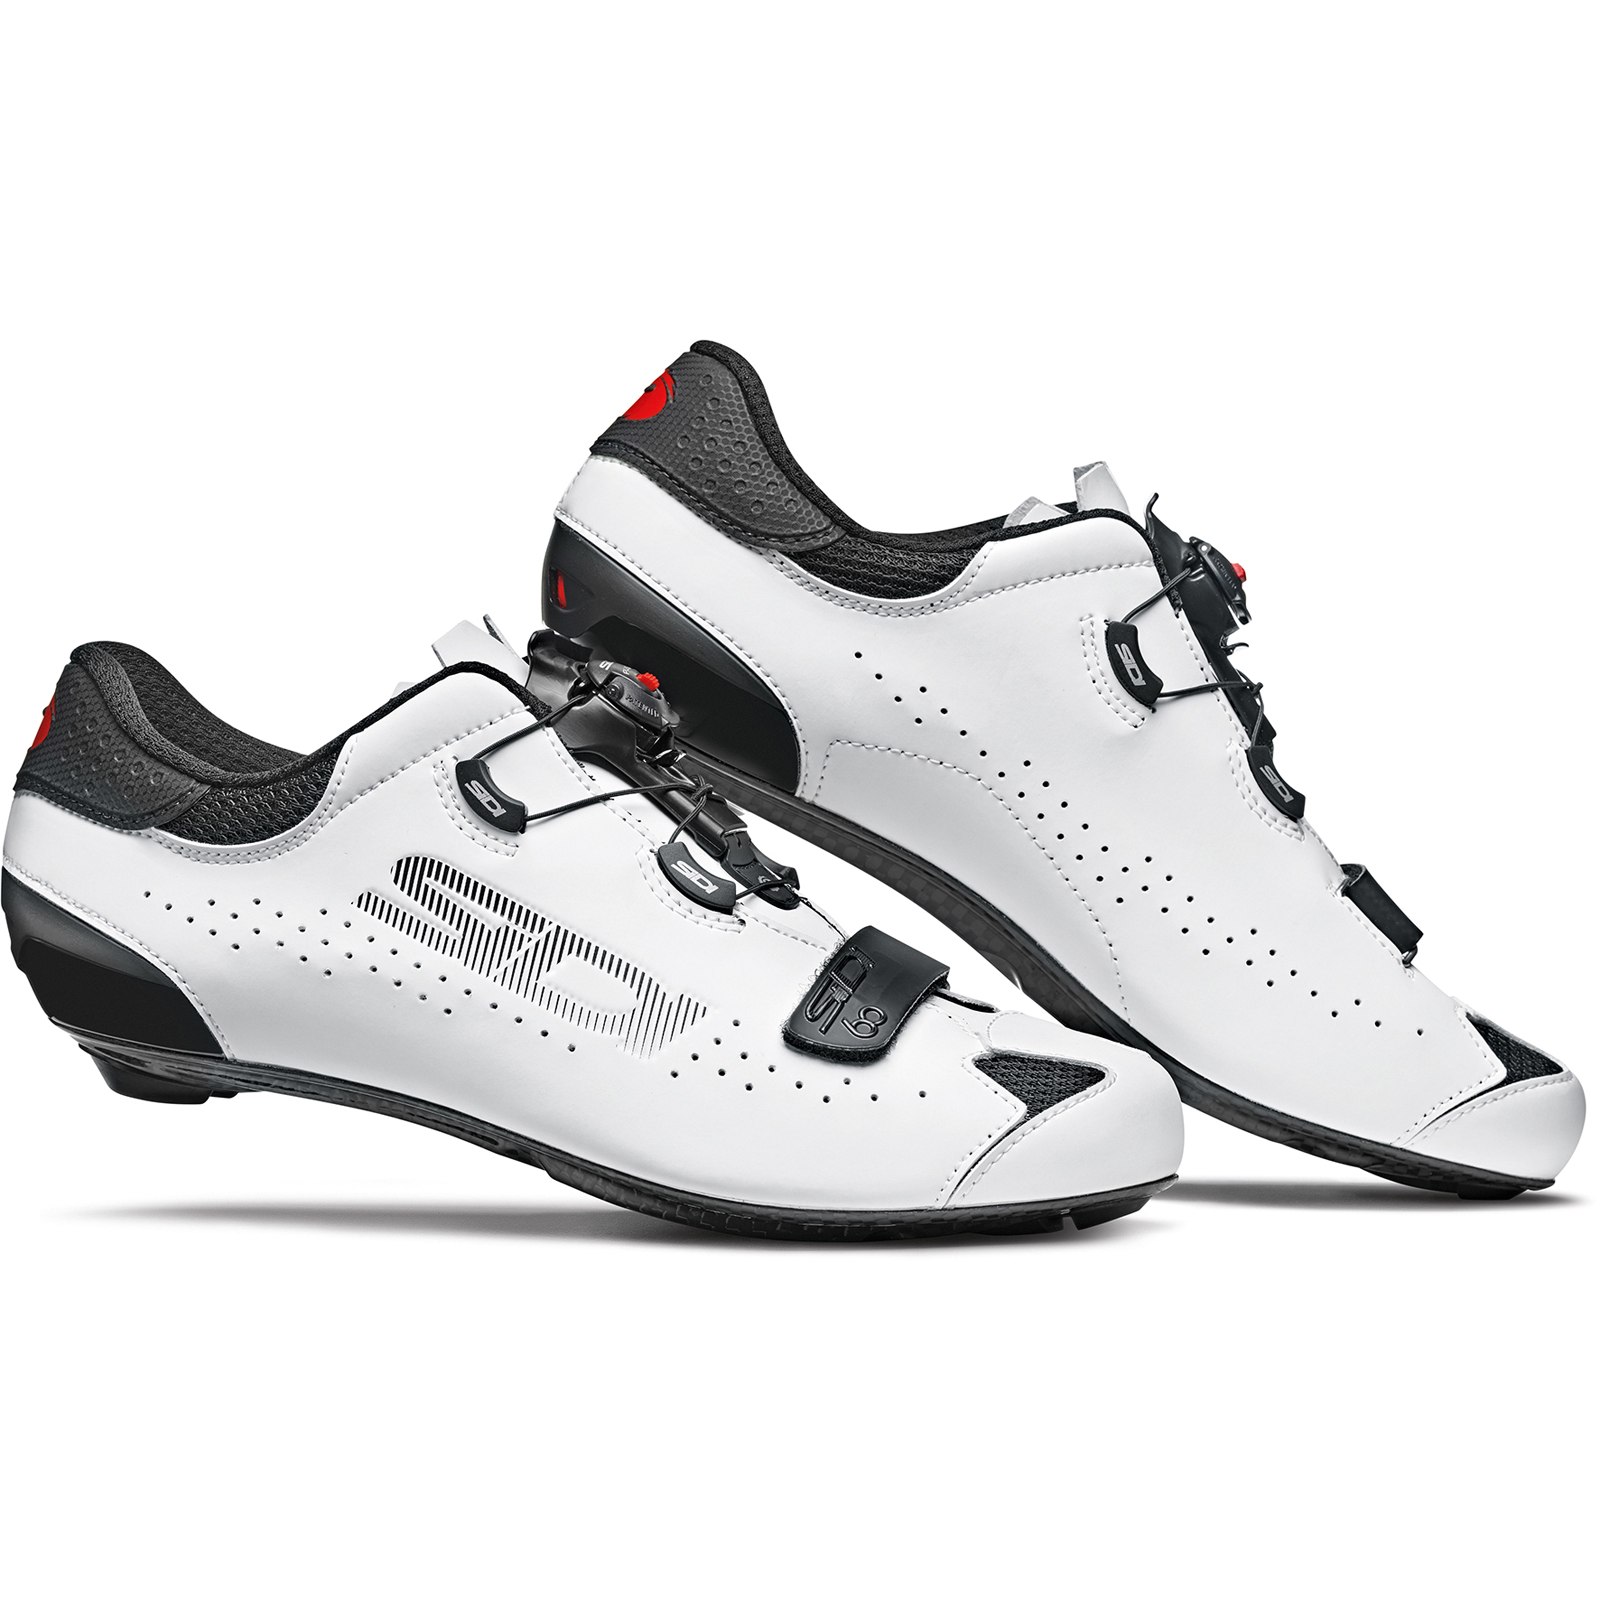 Picture of Sidi Sixty Road Shoe - black/white